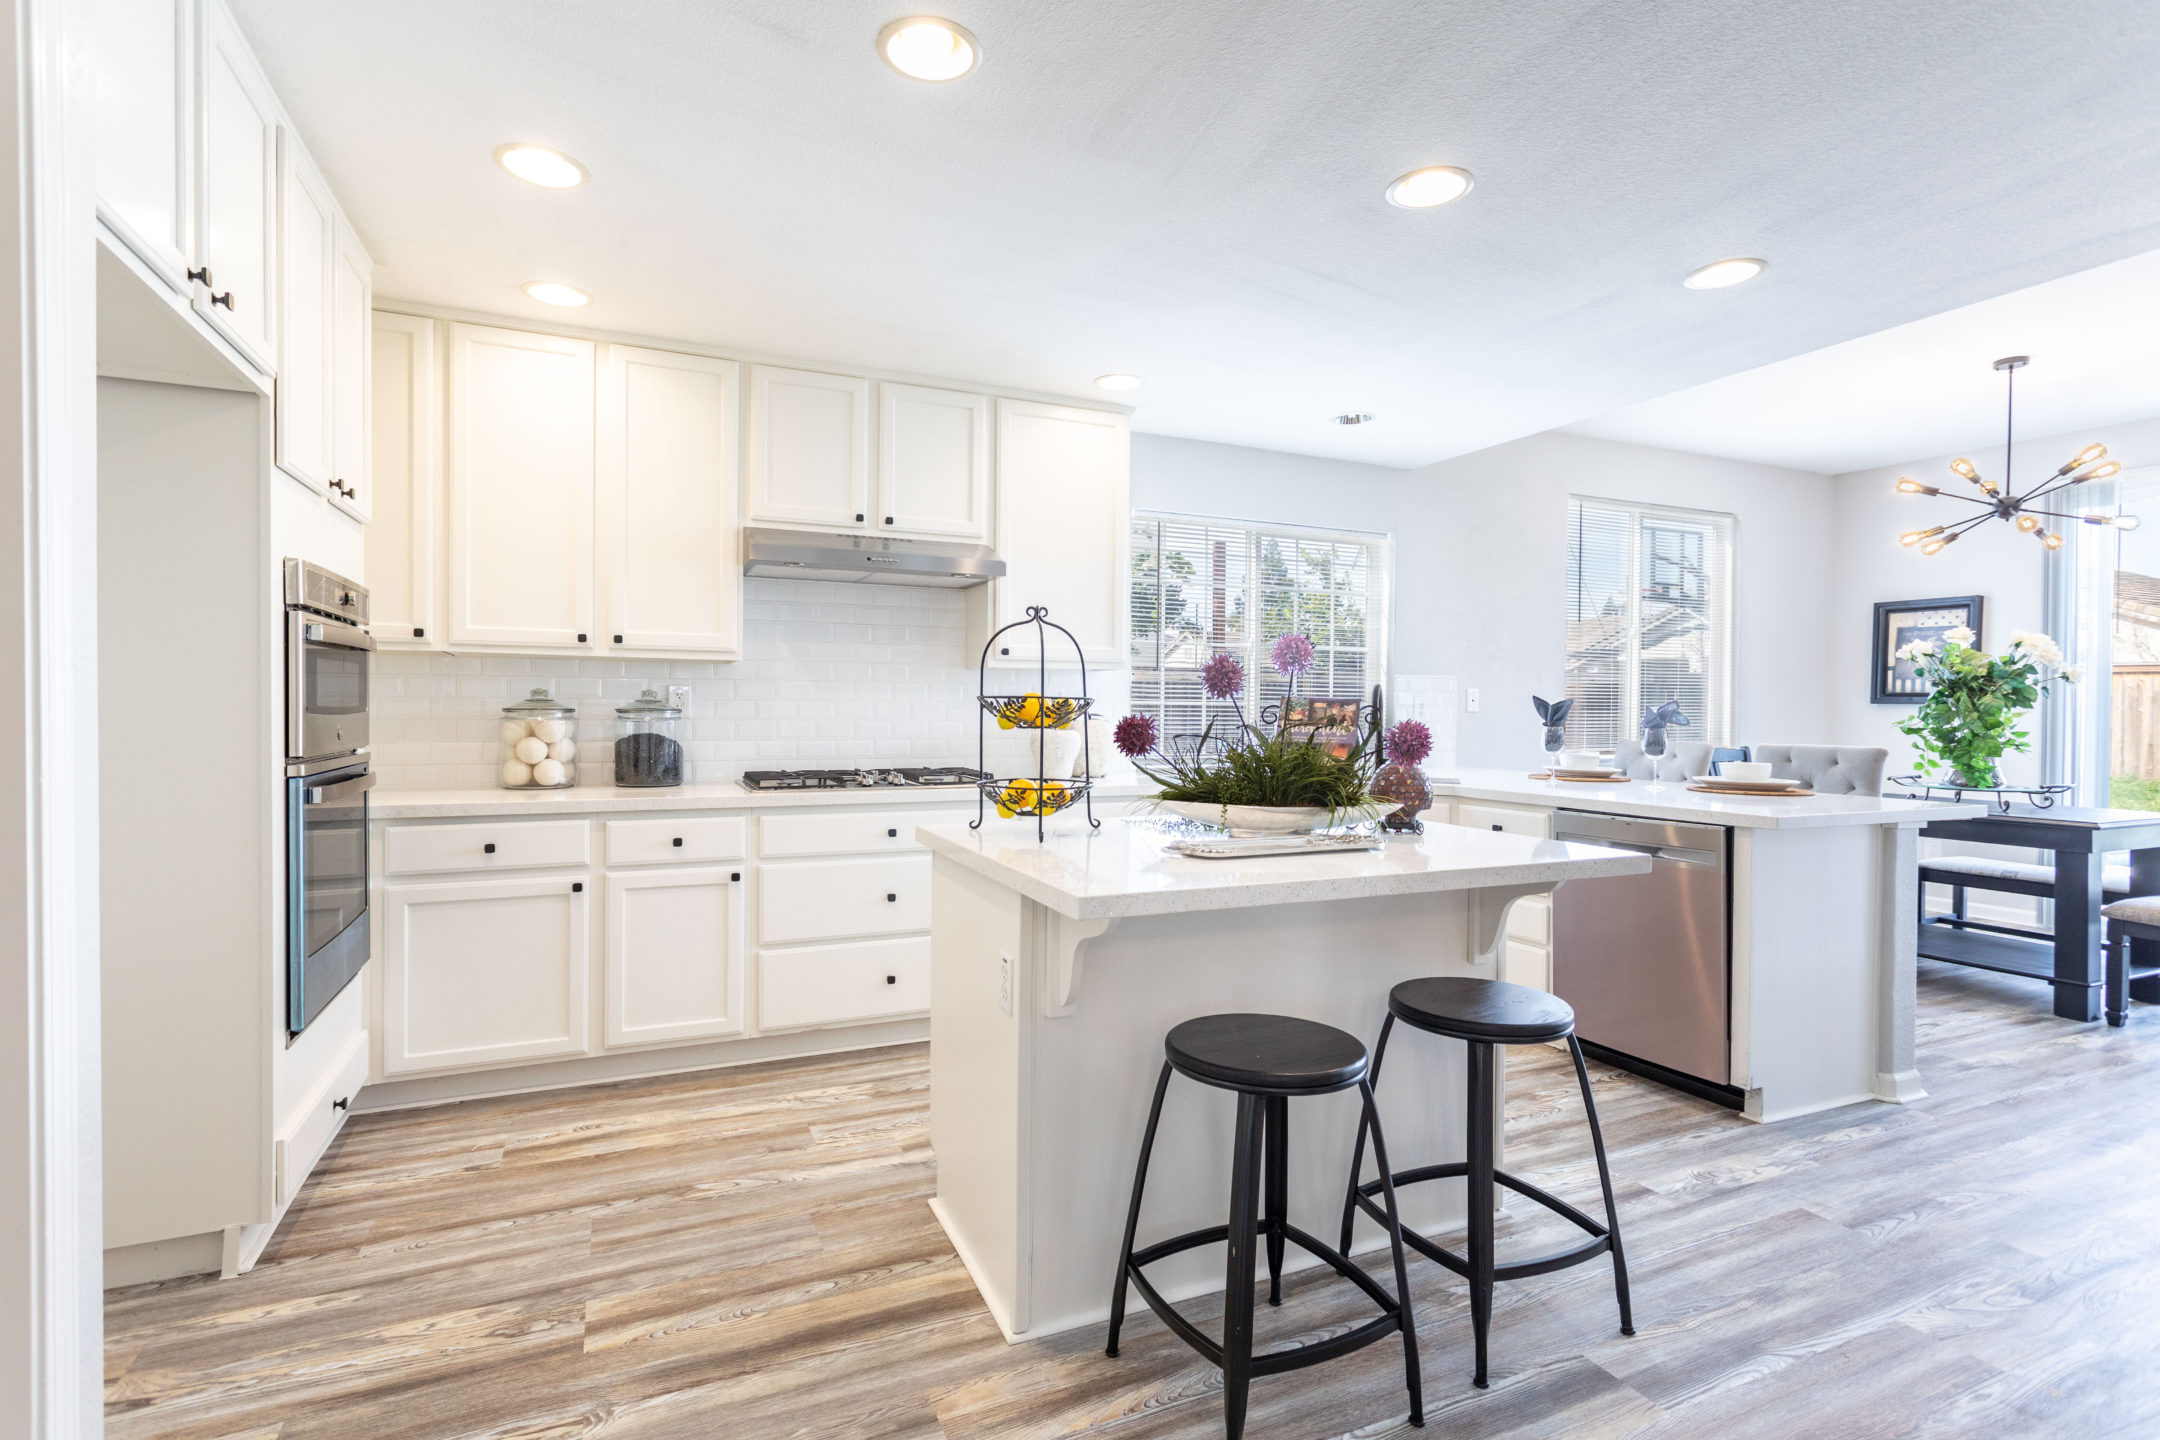 Kitchen Makeover on a Budget: The Cost & ROI of a Kitchen Refresh